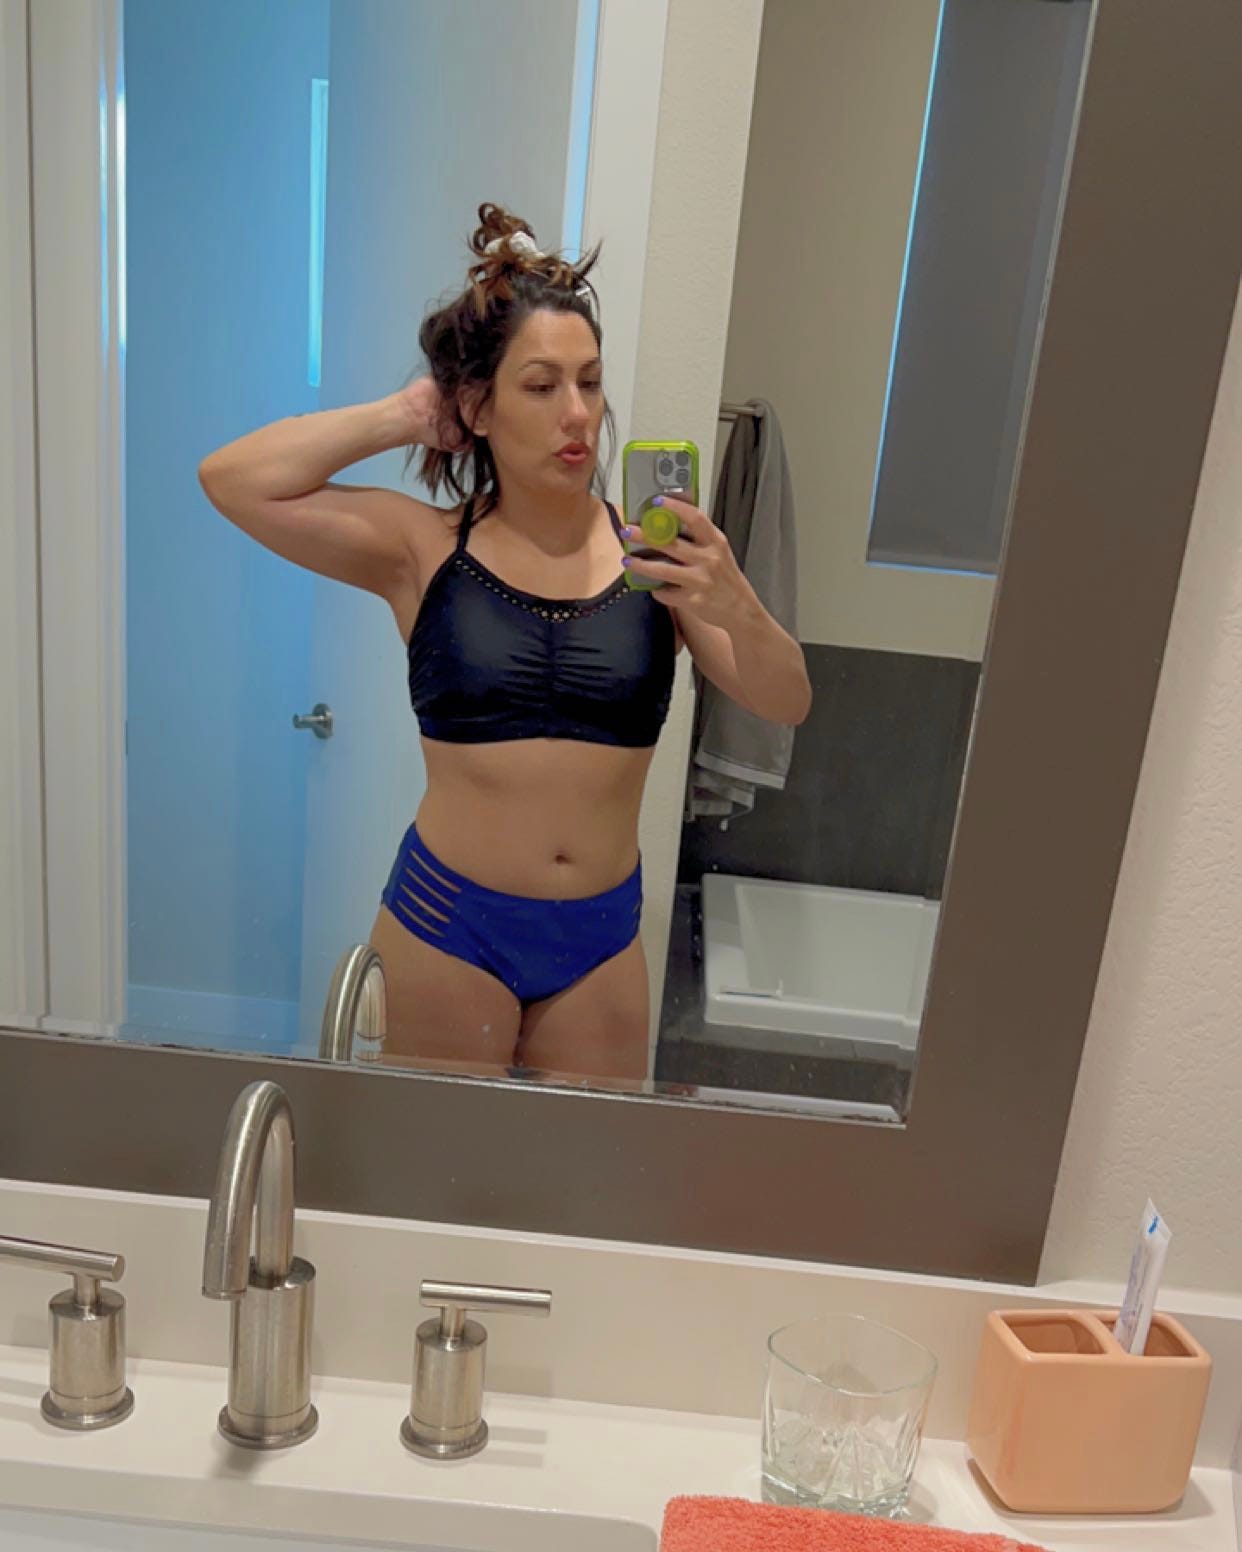 andrea valdez taking a selfie in her bathroom mirror to show her swimsuit